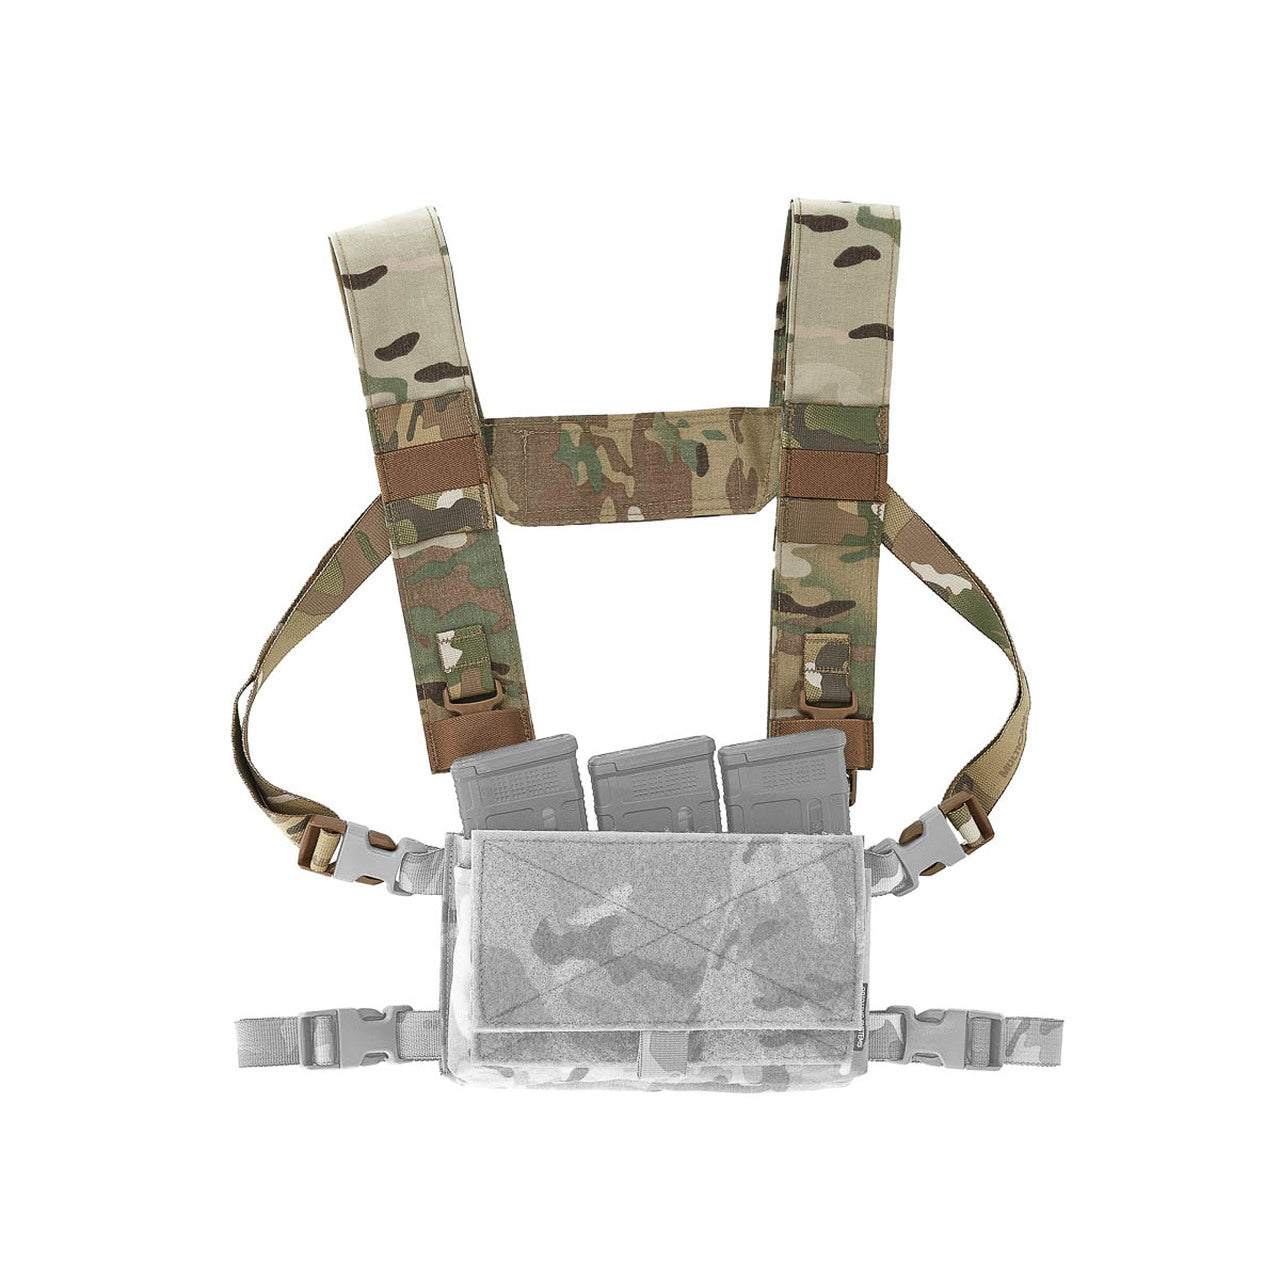 Spiritus Systems Micro Fight Fat Strap Chest Rig Accessory Spiritus Systems 